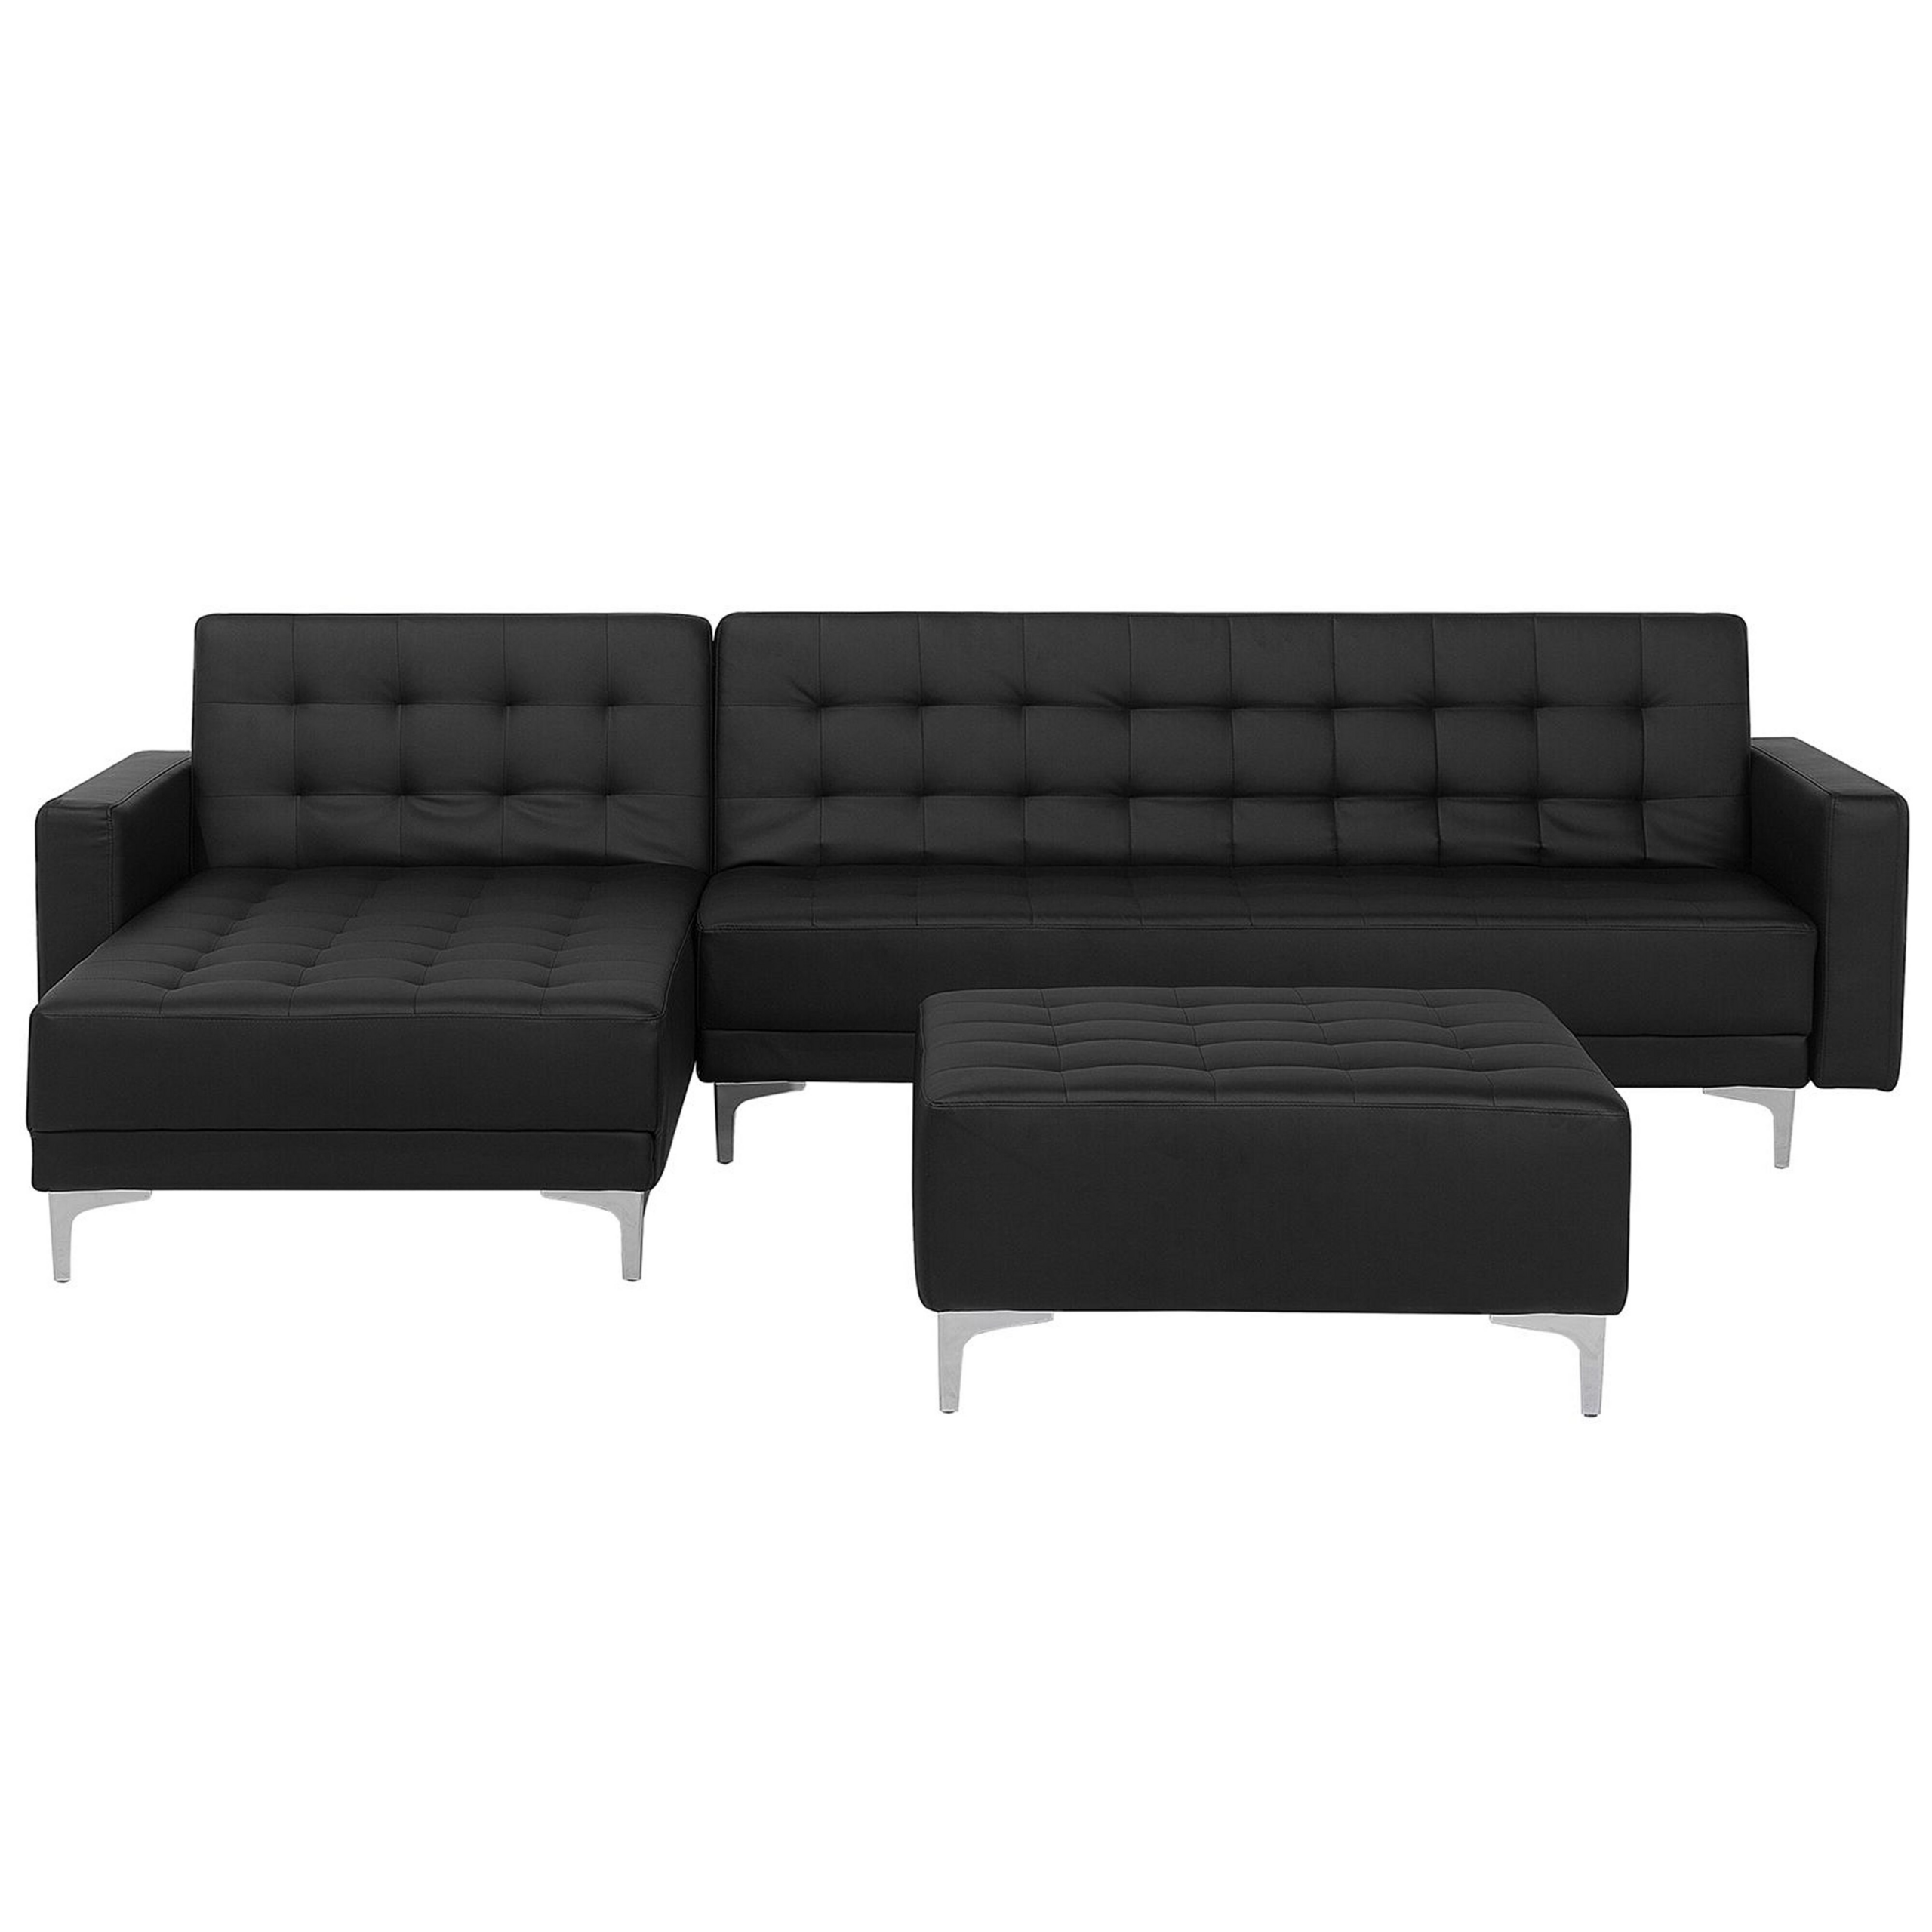 Beliani Corner Sofa Bed Black Faux Leather Tufted Modern L-Shaped Modular 4 Seater with Ottoman Right Hand Chaise Longue